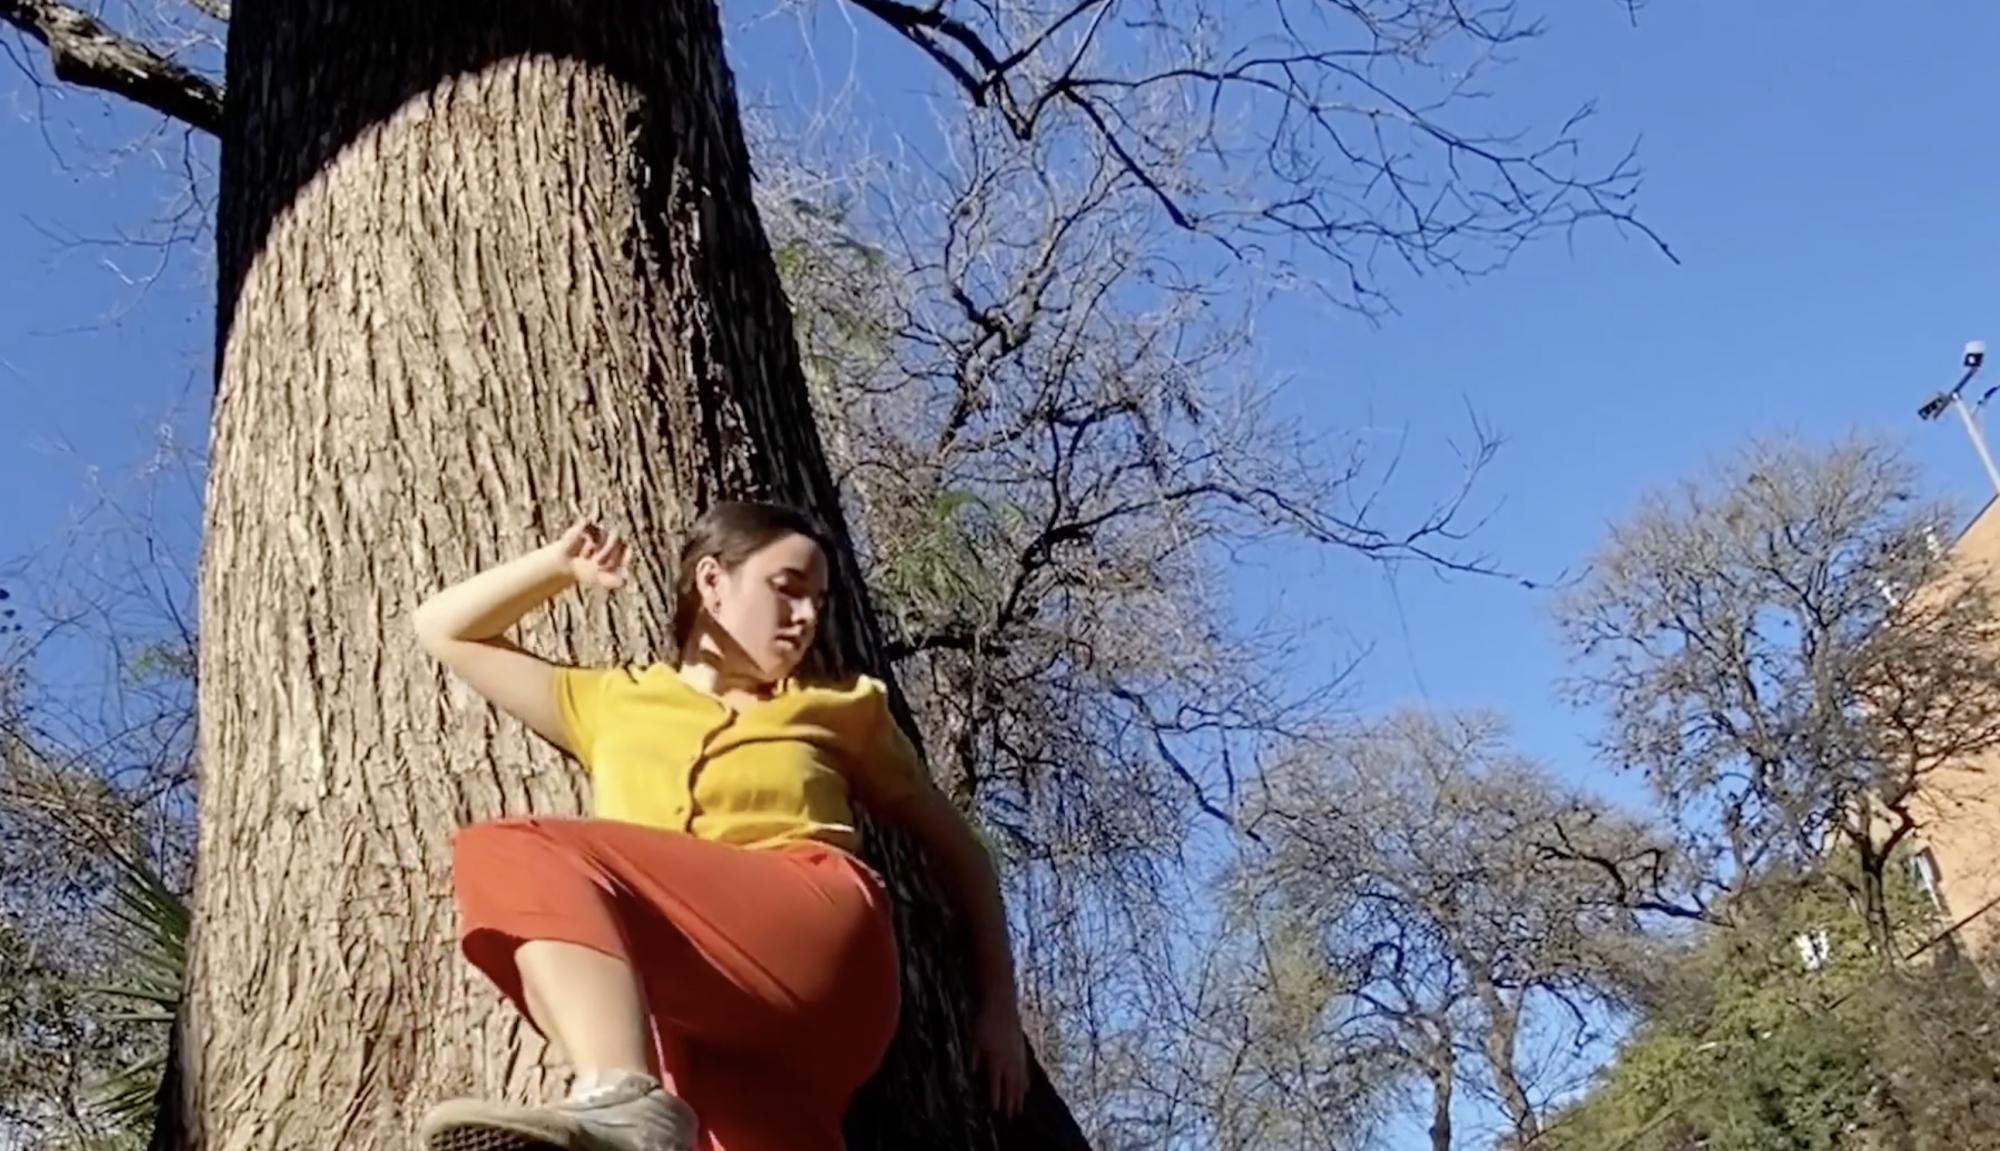 dancer leans against a tree with their left leg and right arm raised